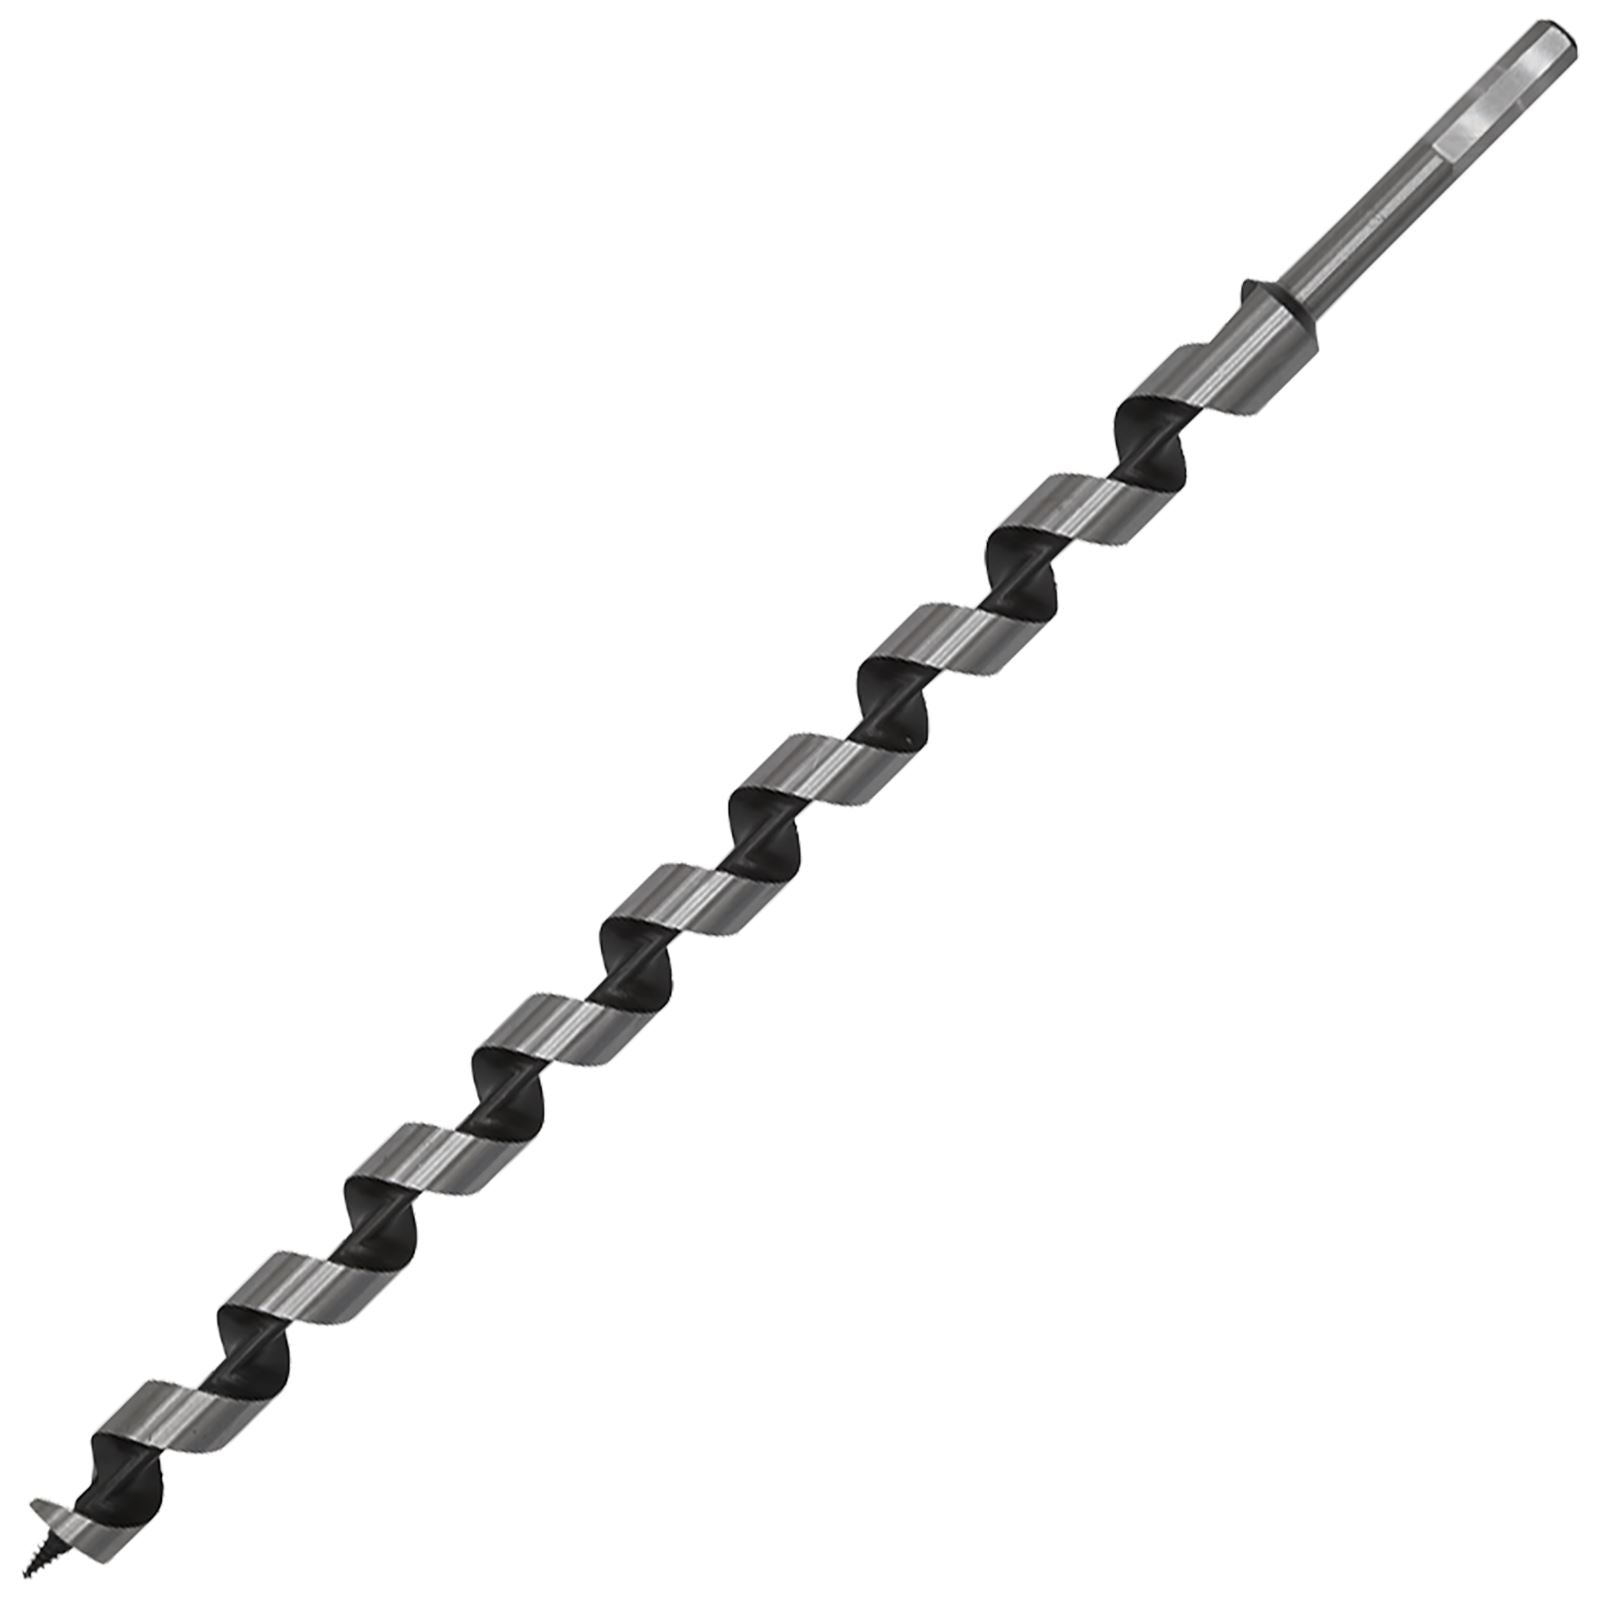 Worksafe by Sealey Auger Wood Drill Bit 22mm x 460mm